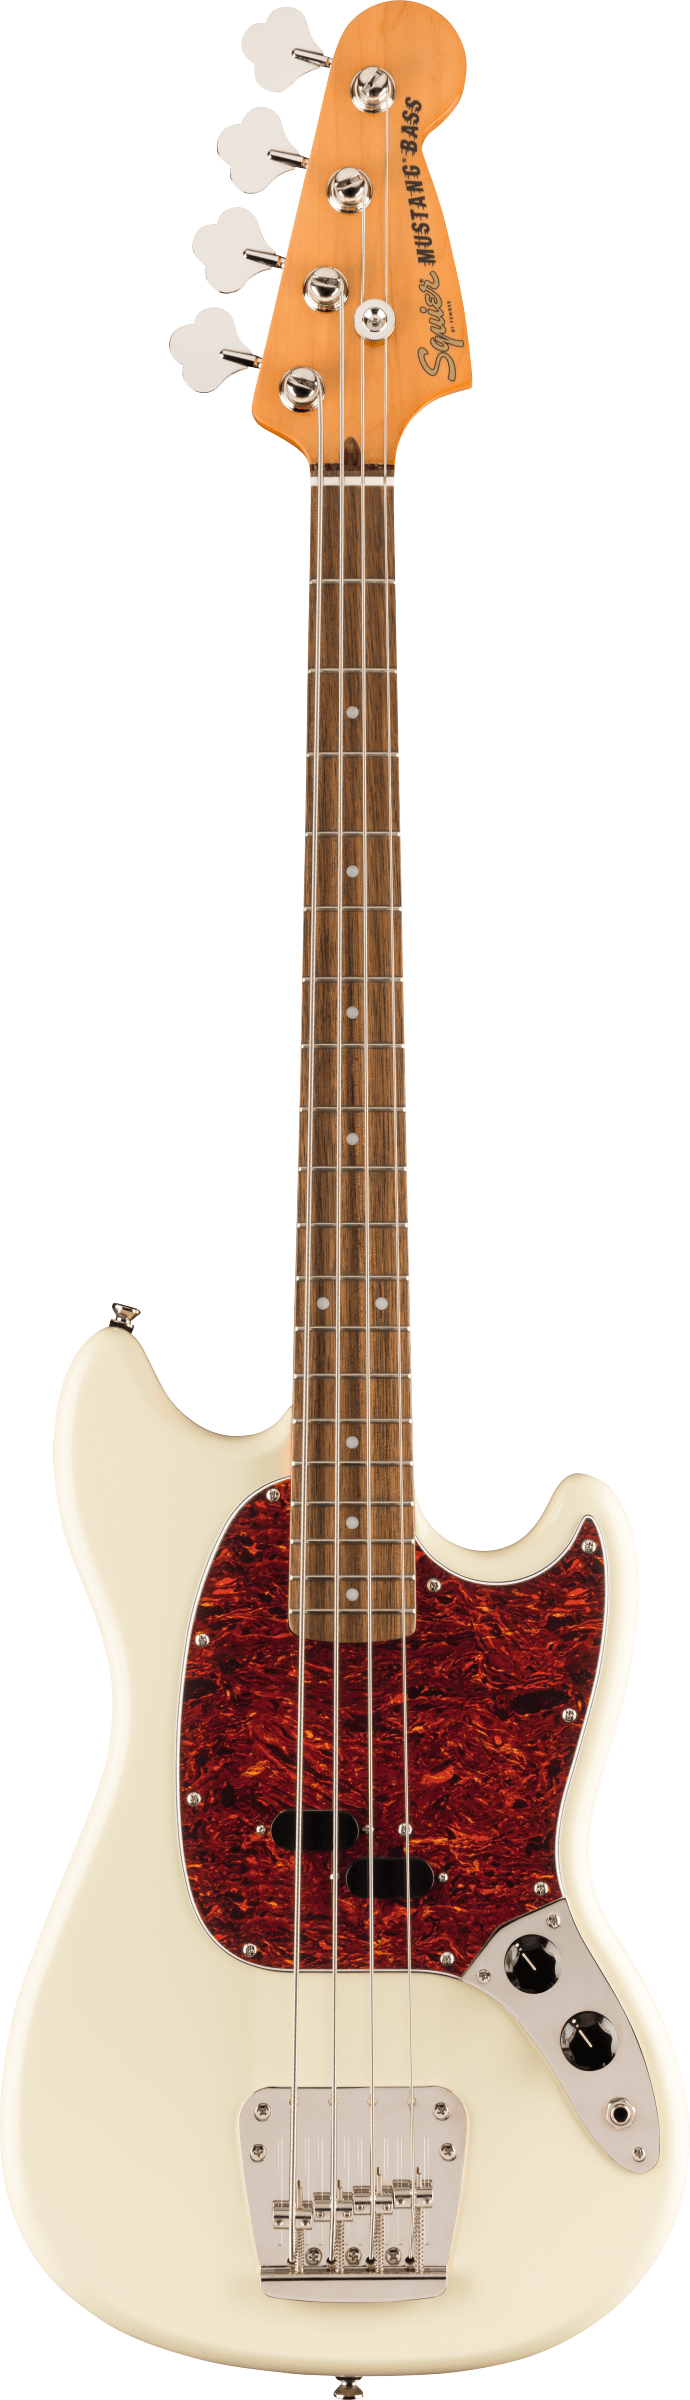 SQUIER CLASSIC VIBE 60s MUSTANG BASS OLYMPIC WHITE - Joondalup Music Centre